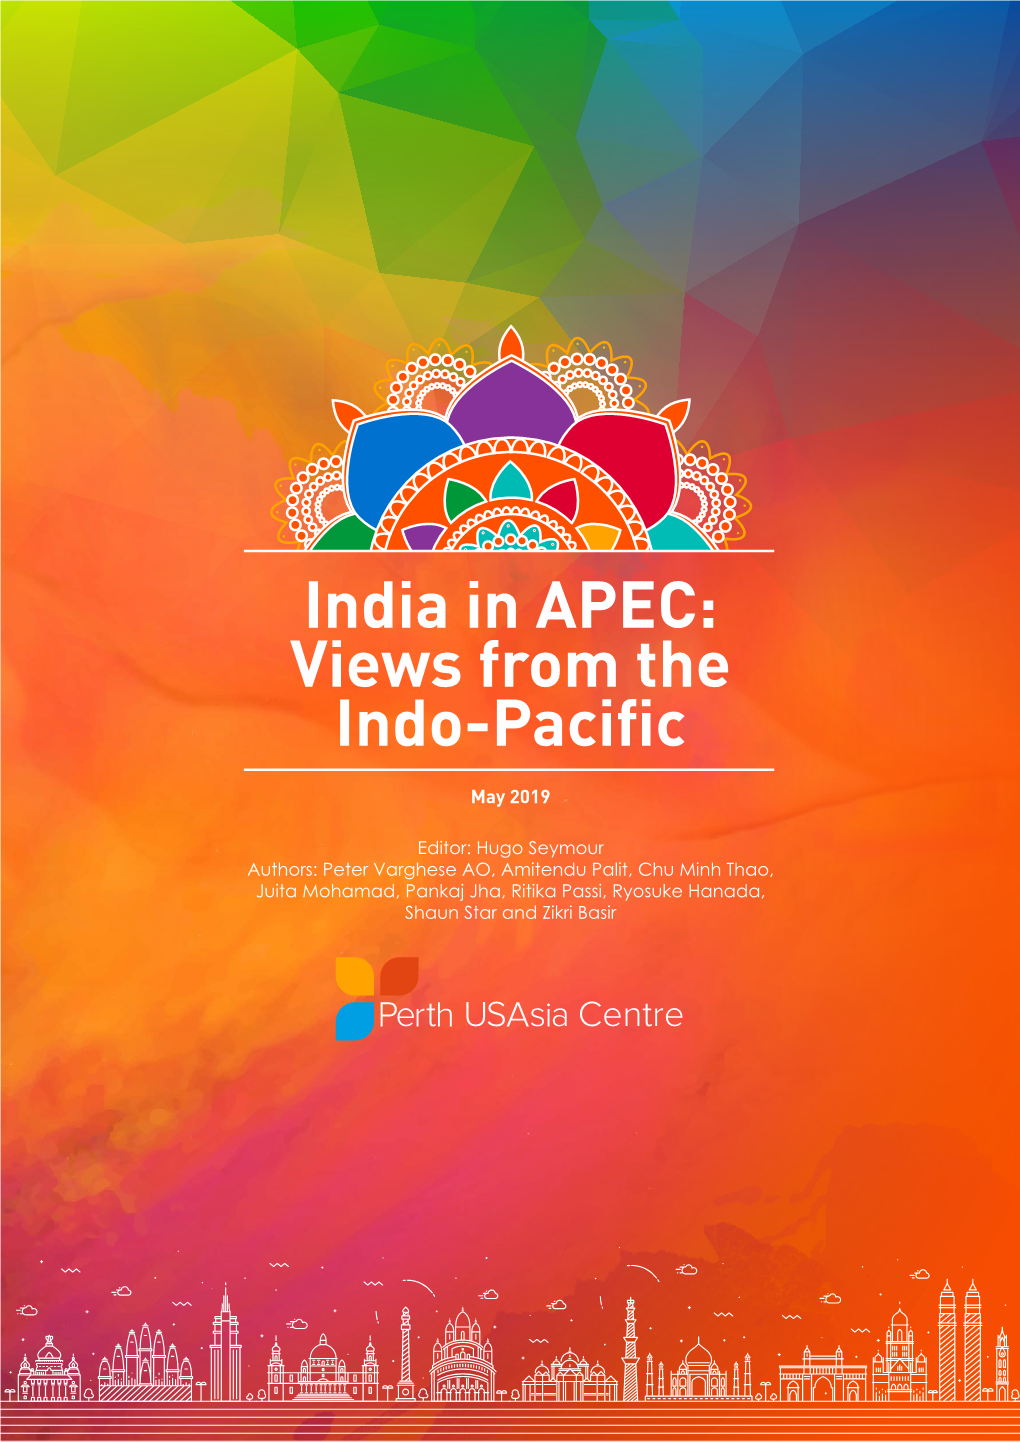 India in APEC: Views from the Indo-Pacific